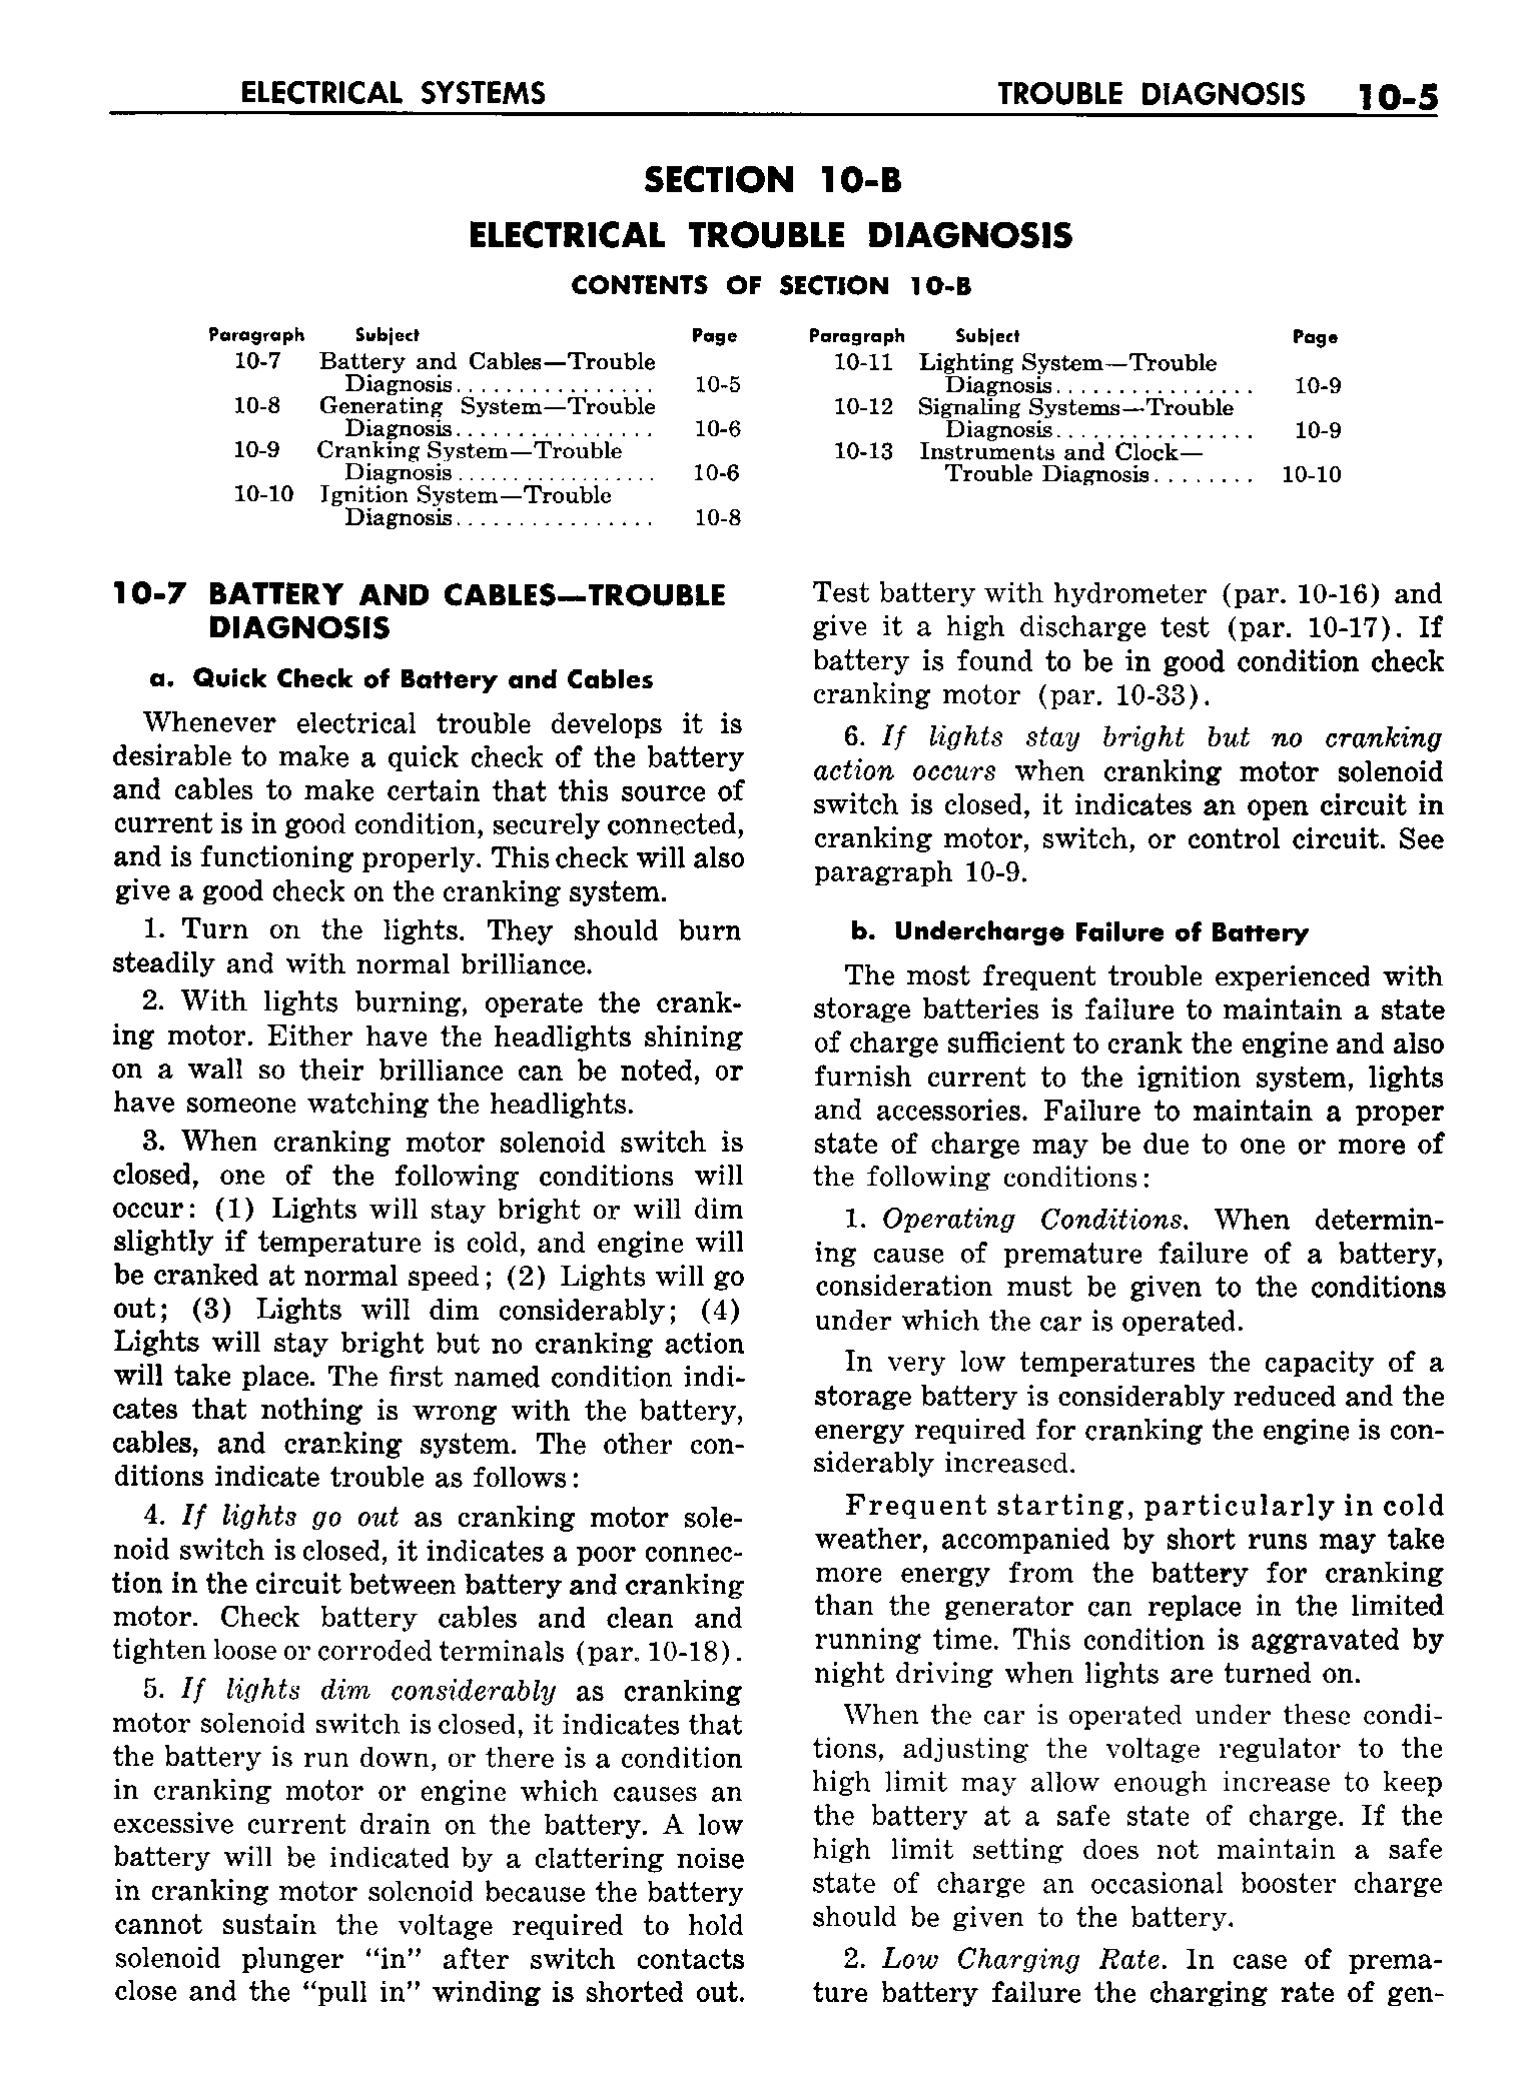 n_11 1958 Buick Shop Manual - Electrical Systems_5.jpg